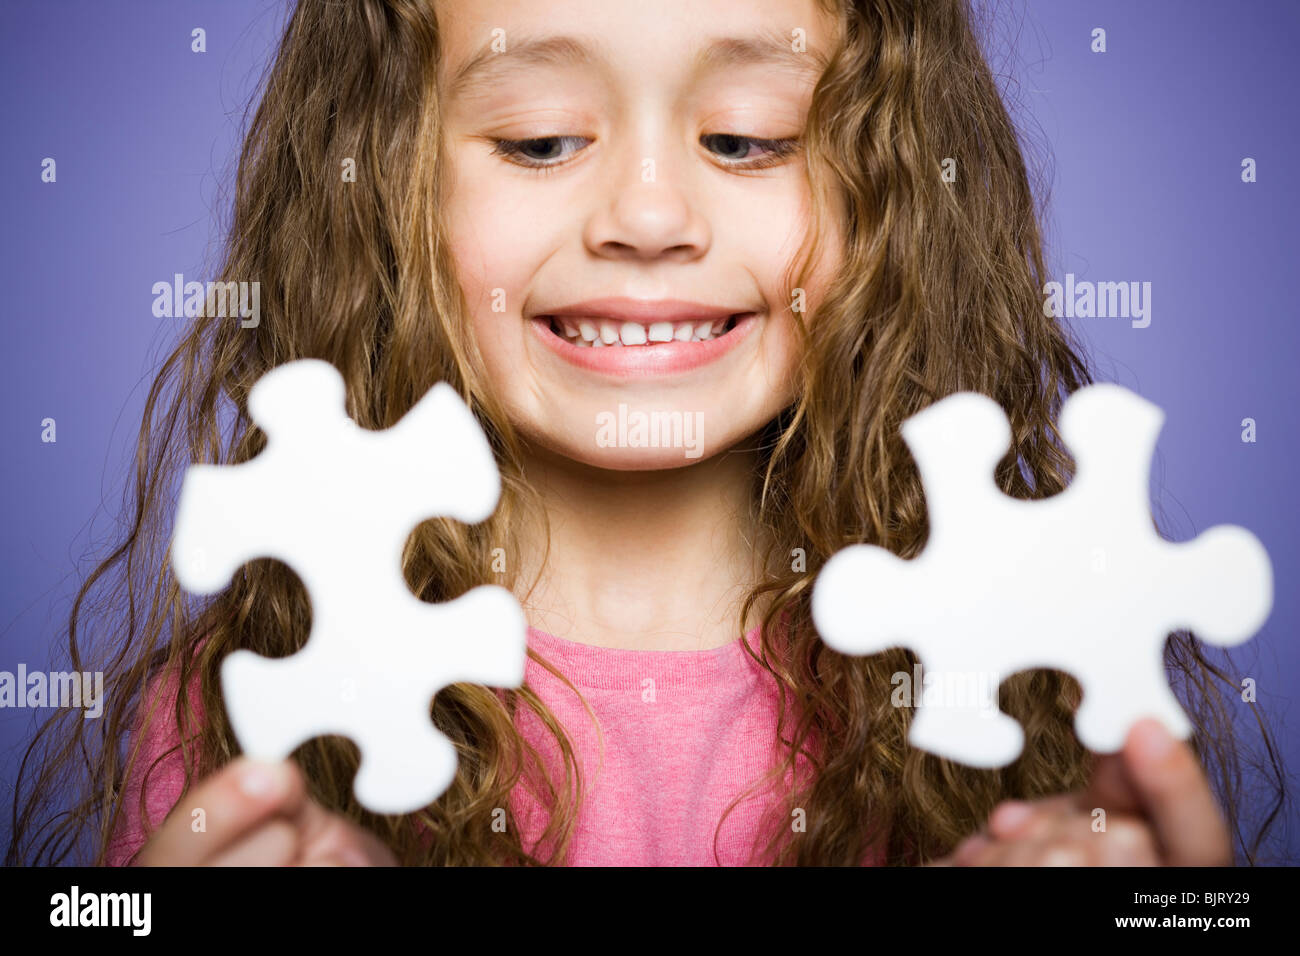 Young girl holding cookie jar Stock Photo